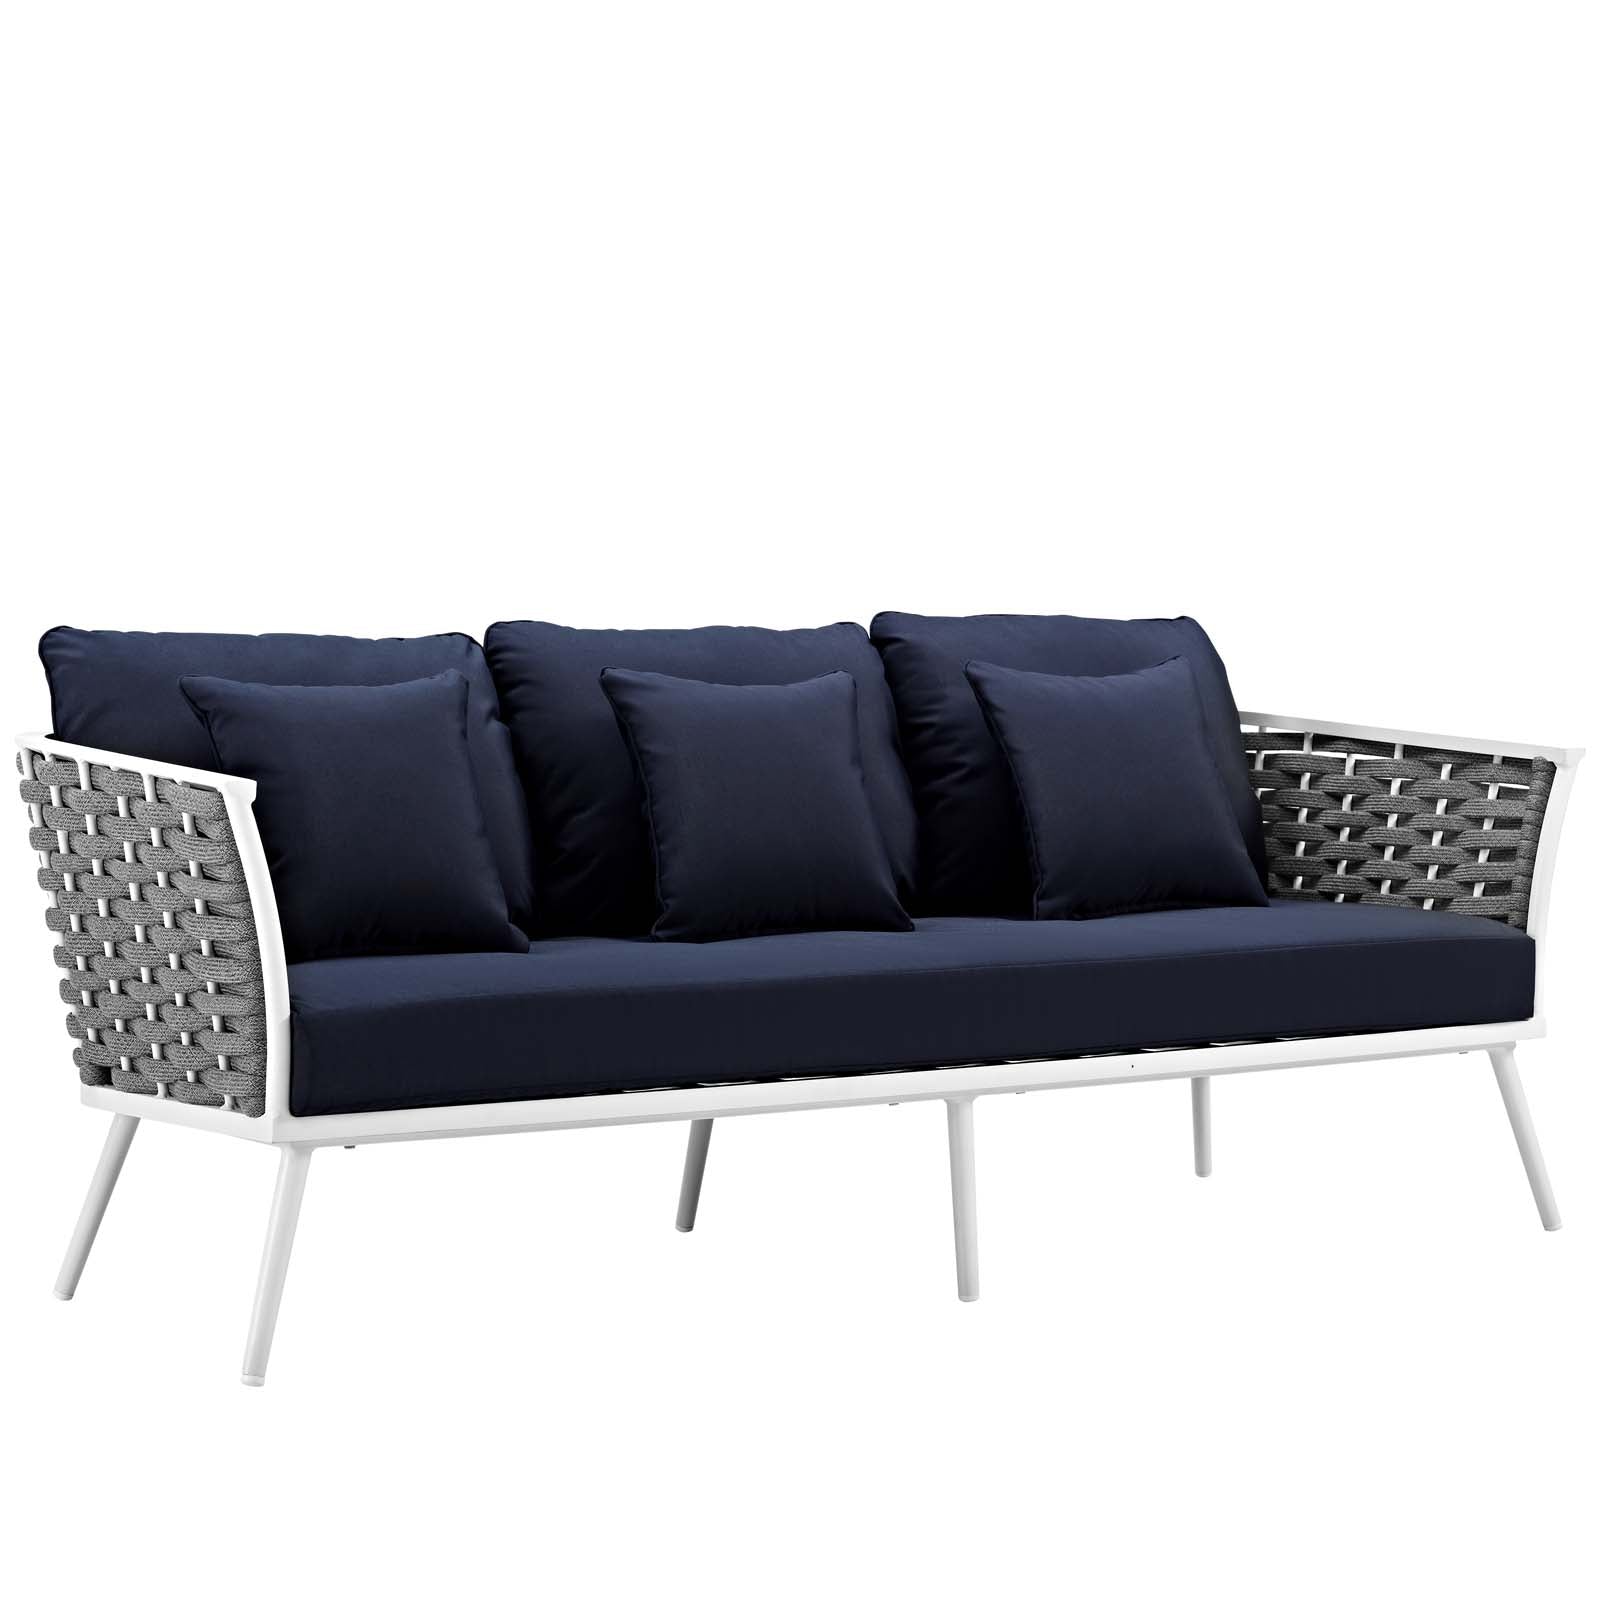 Stance 2 Piece Outdoor Patio Aluminum Sectional Sofa Set-Outdoor Set-Modway-Wall2Wall Furnishings